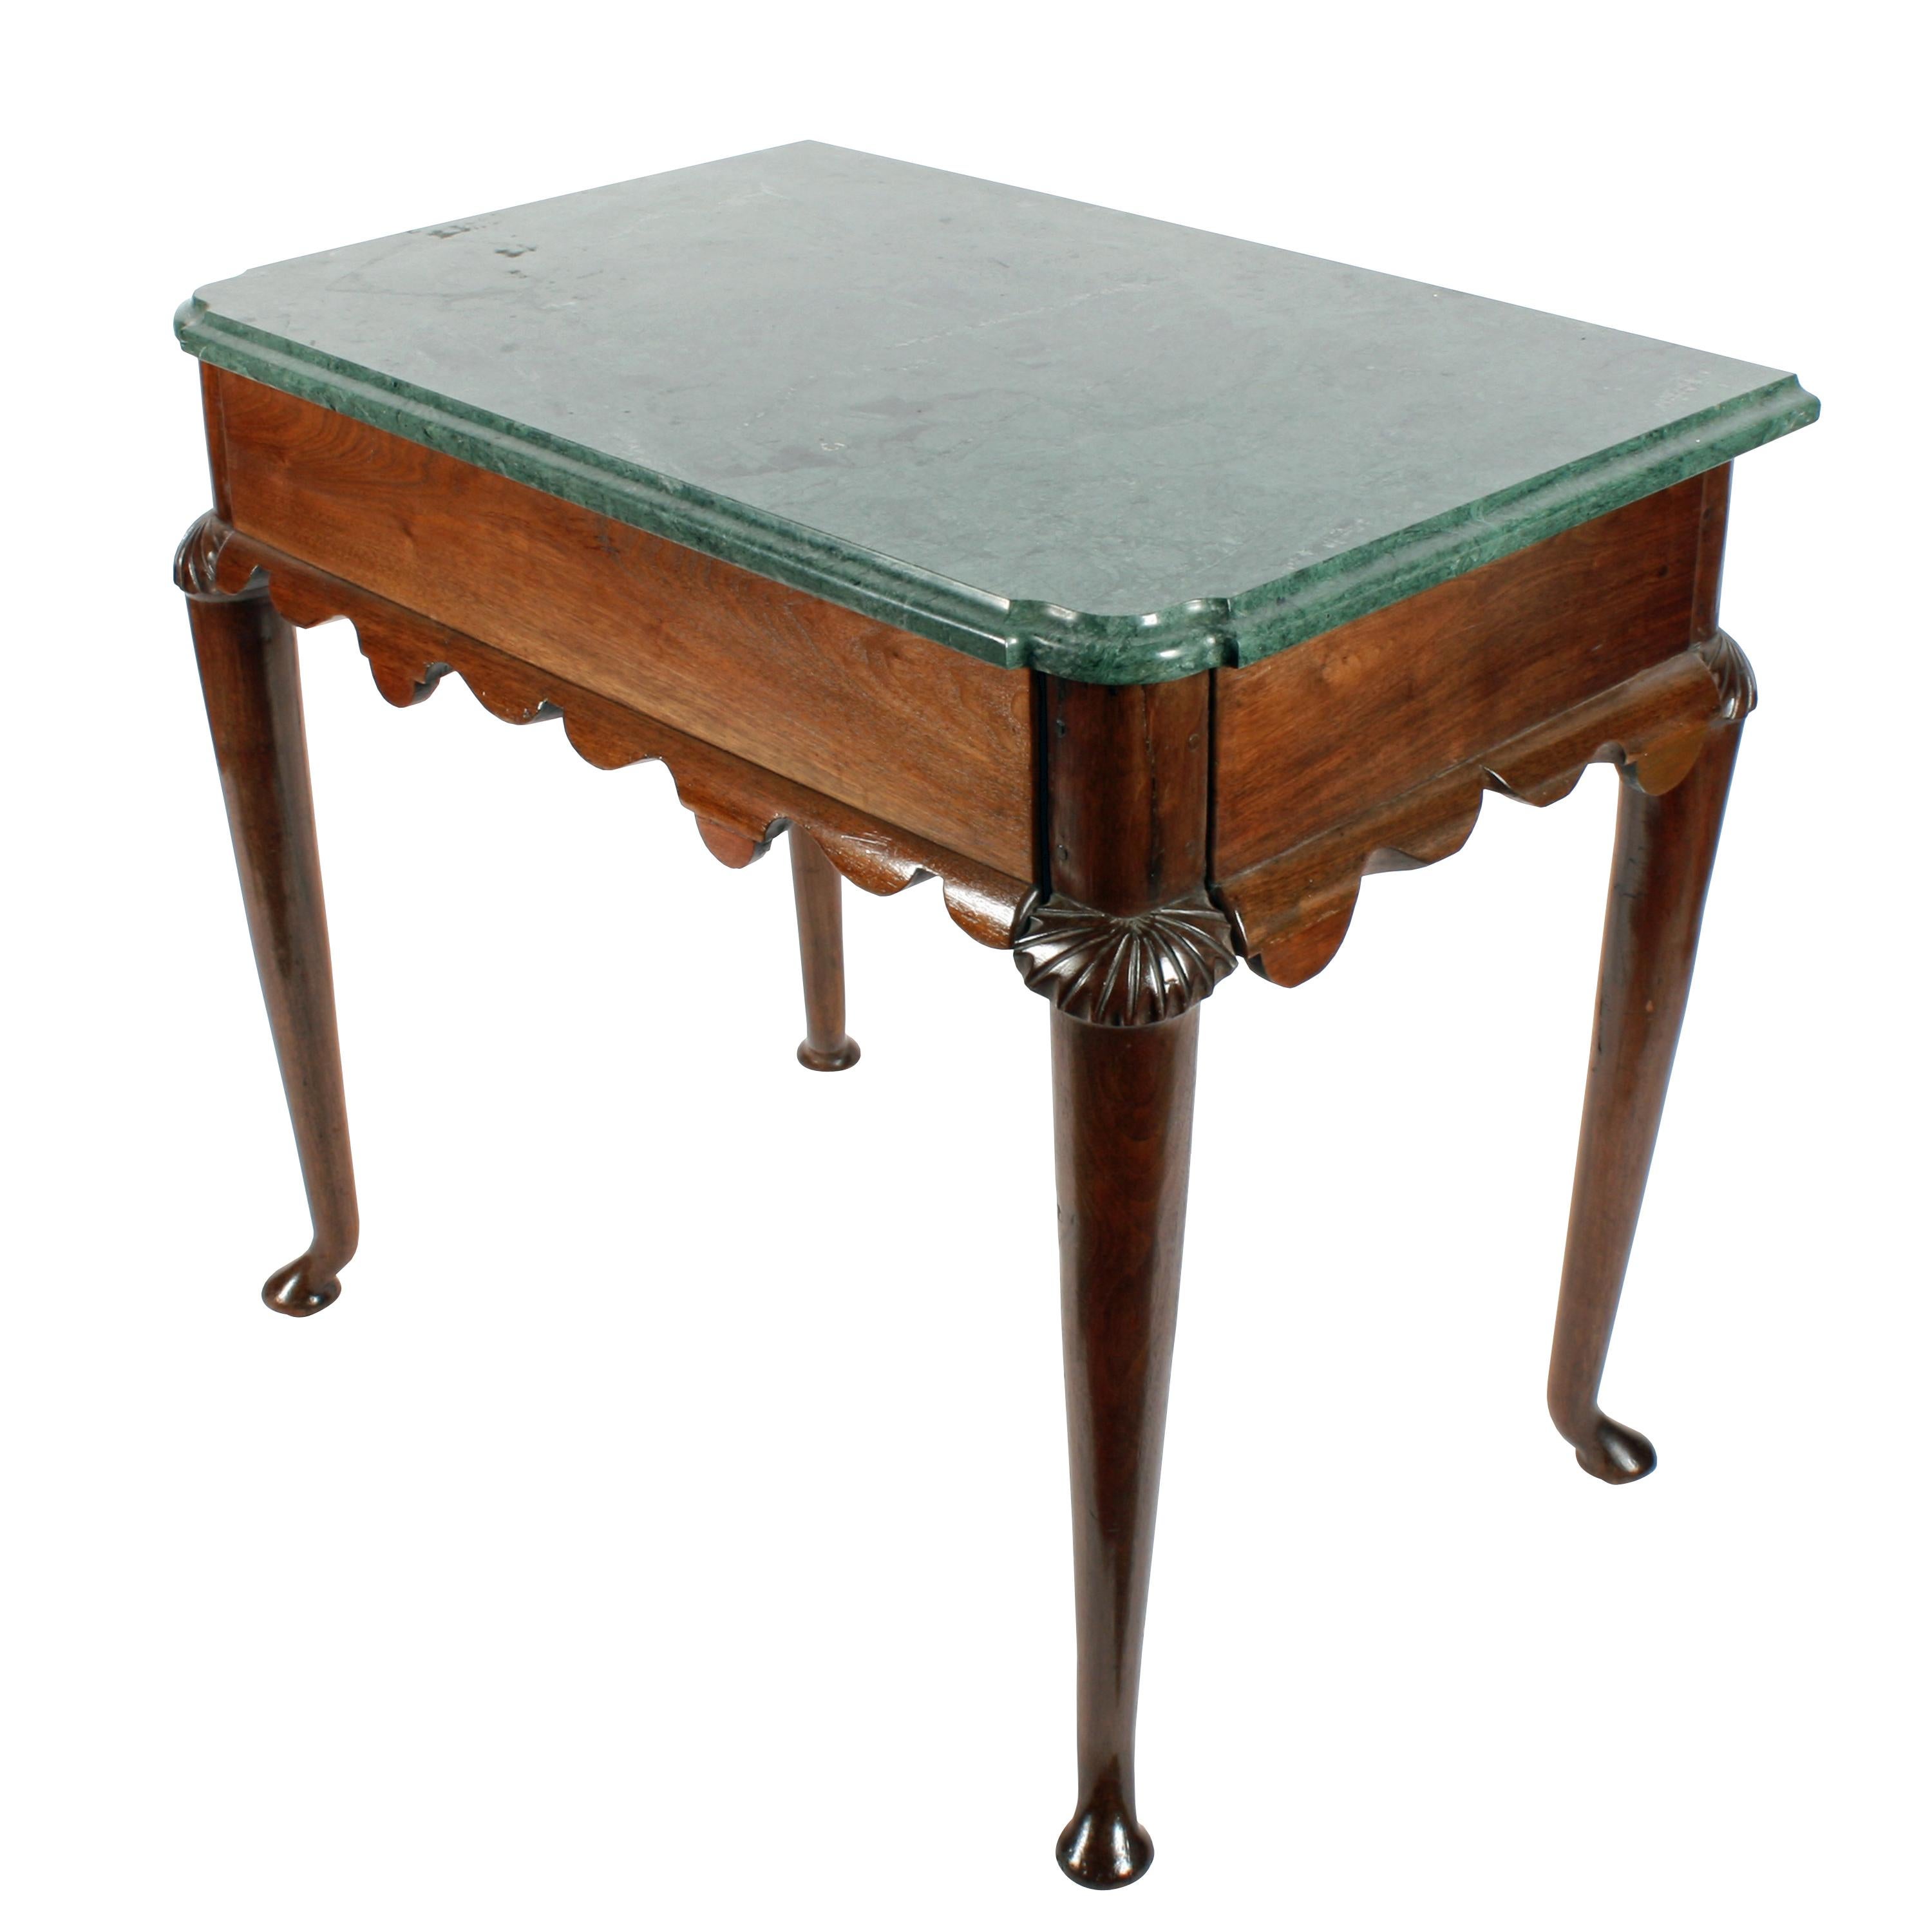 Walnut marble-top console table


A middle of the 18th century solid walnut console table with a shaped green marble top.

The table has four long tapering turned legs with unusual kick out pad feet and carved knees.

The frieze between the